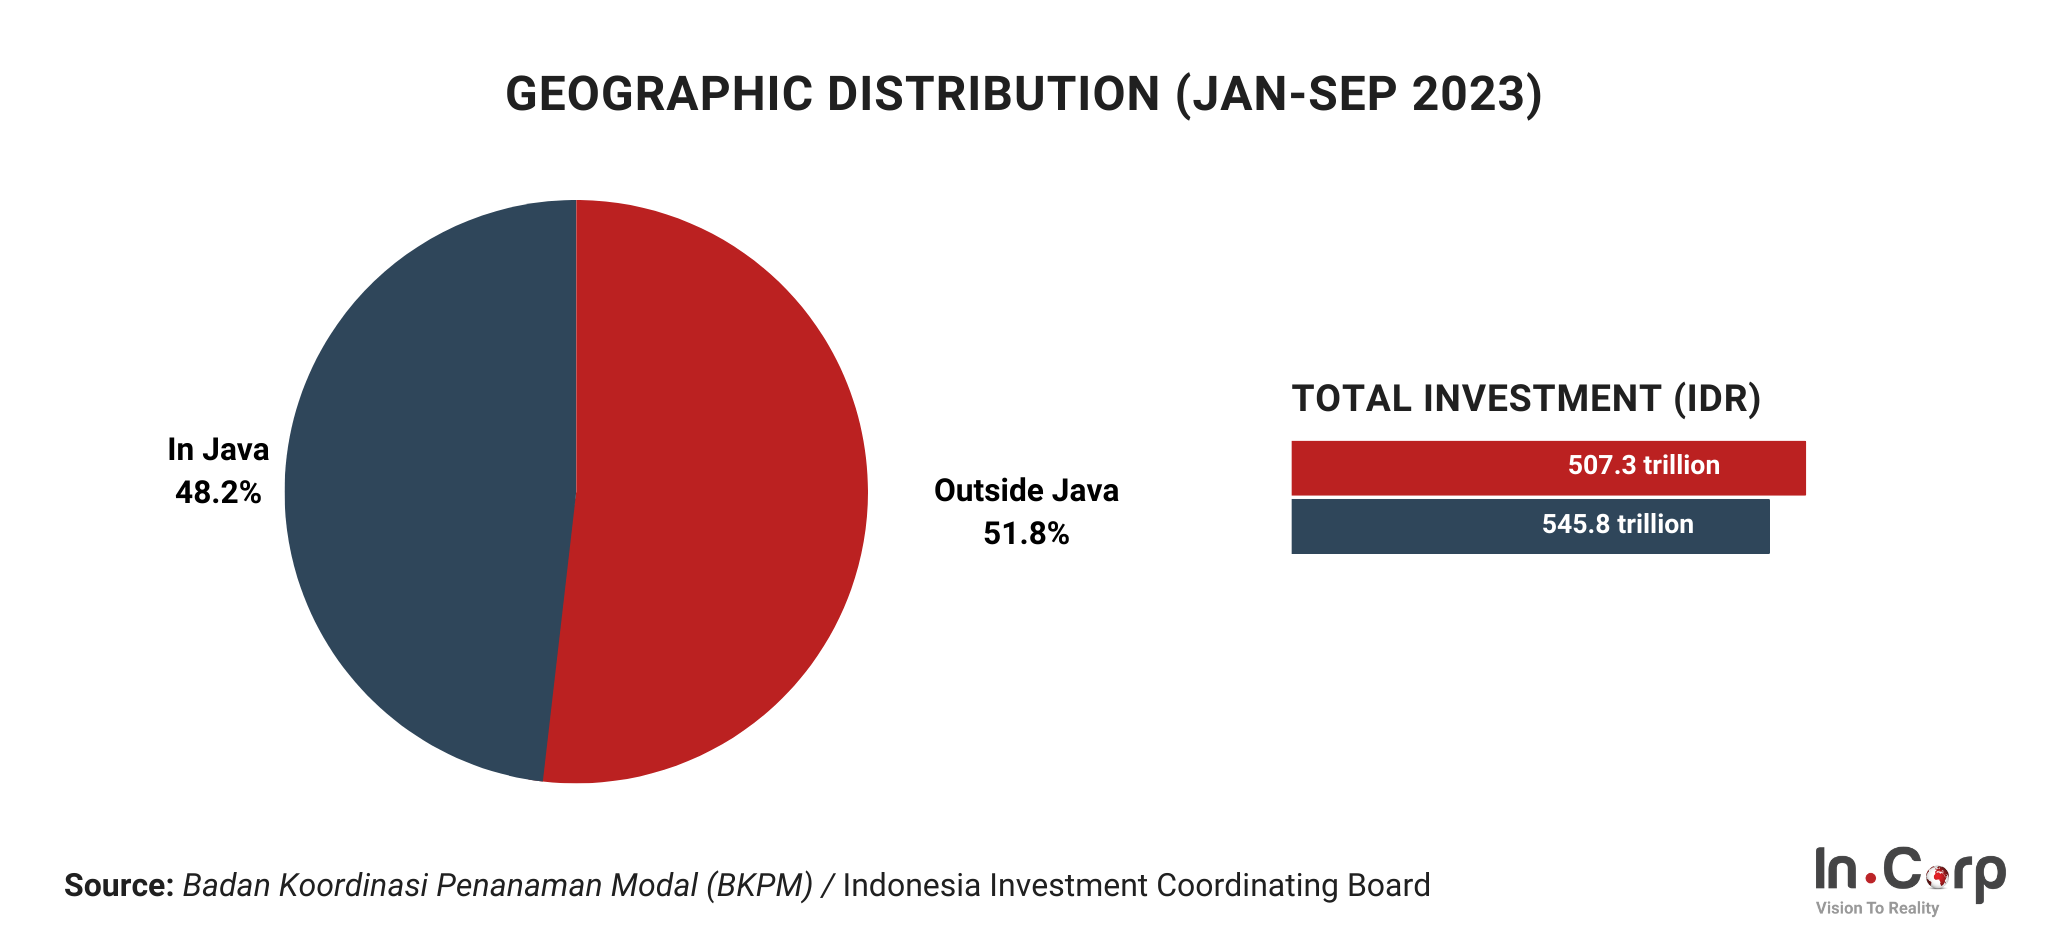 Foreign Investment during Indonesian Presidential Elections